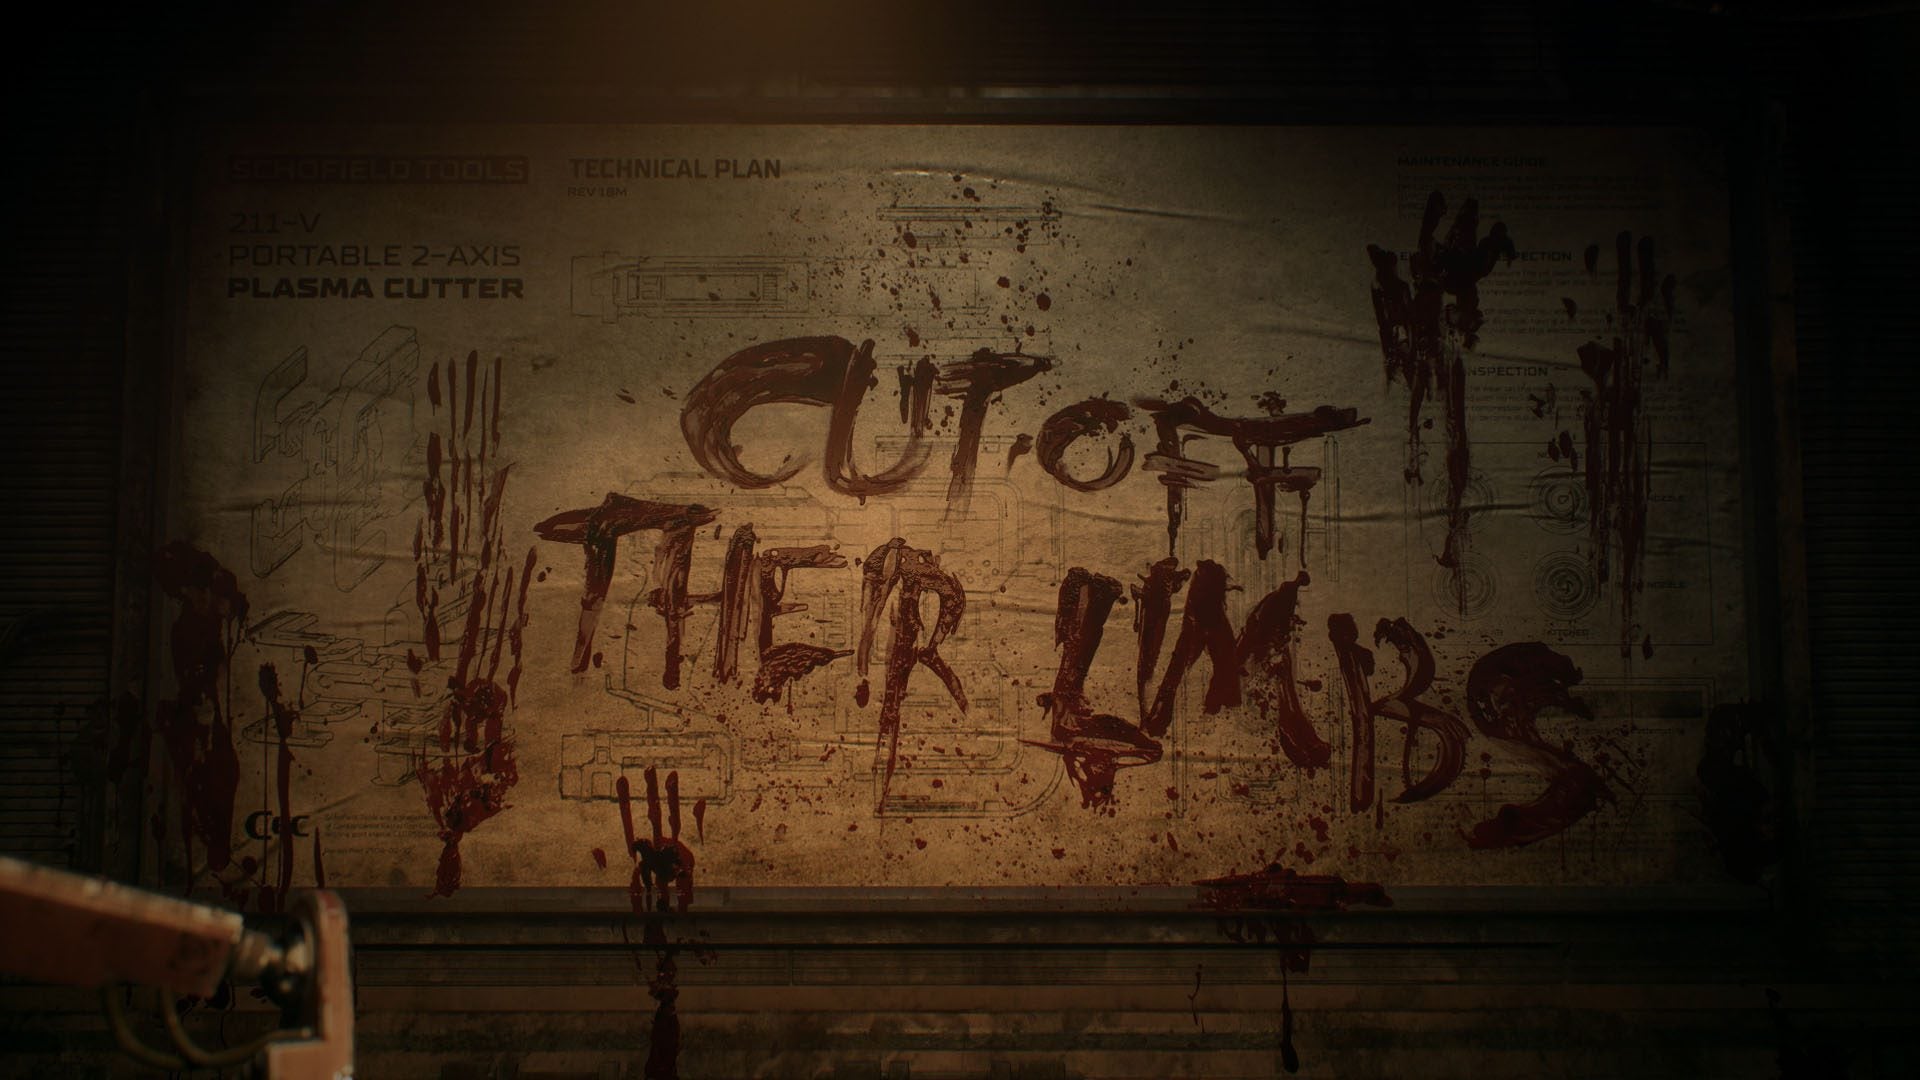 What do you think about graffiti as storytelling in video games?